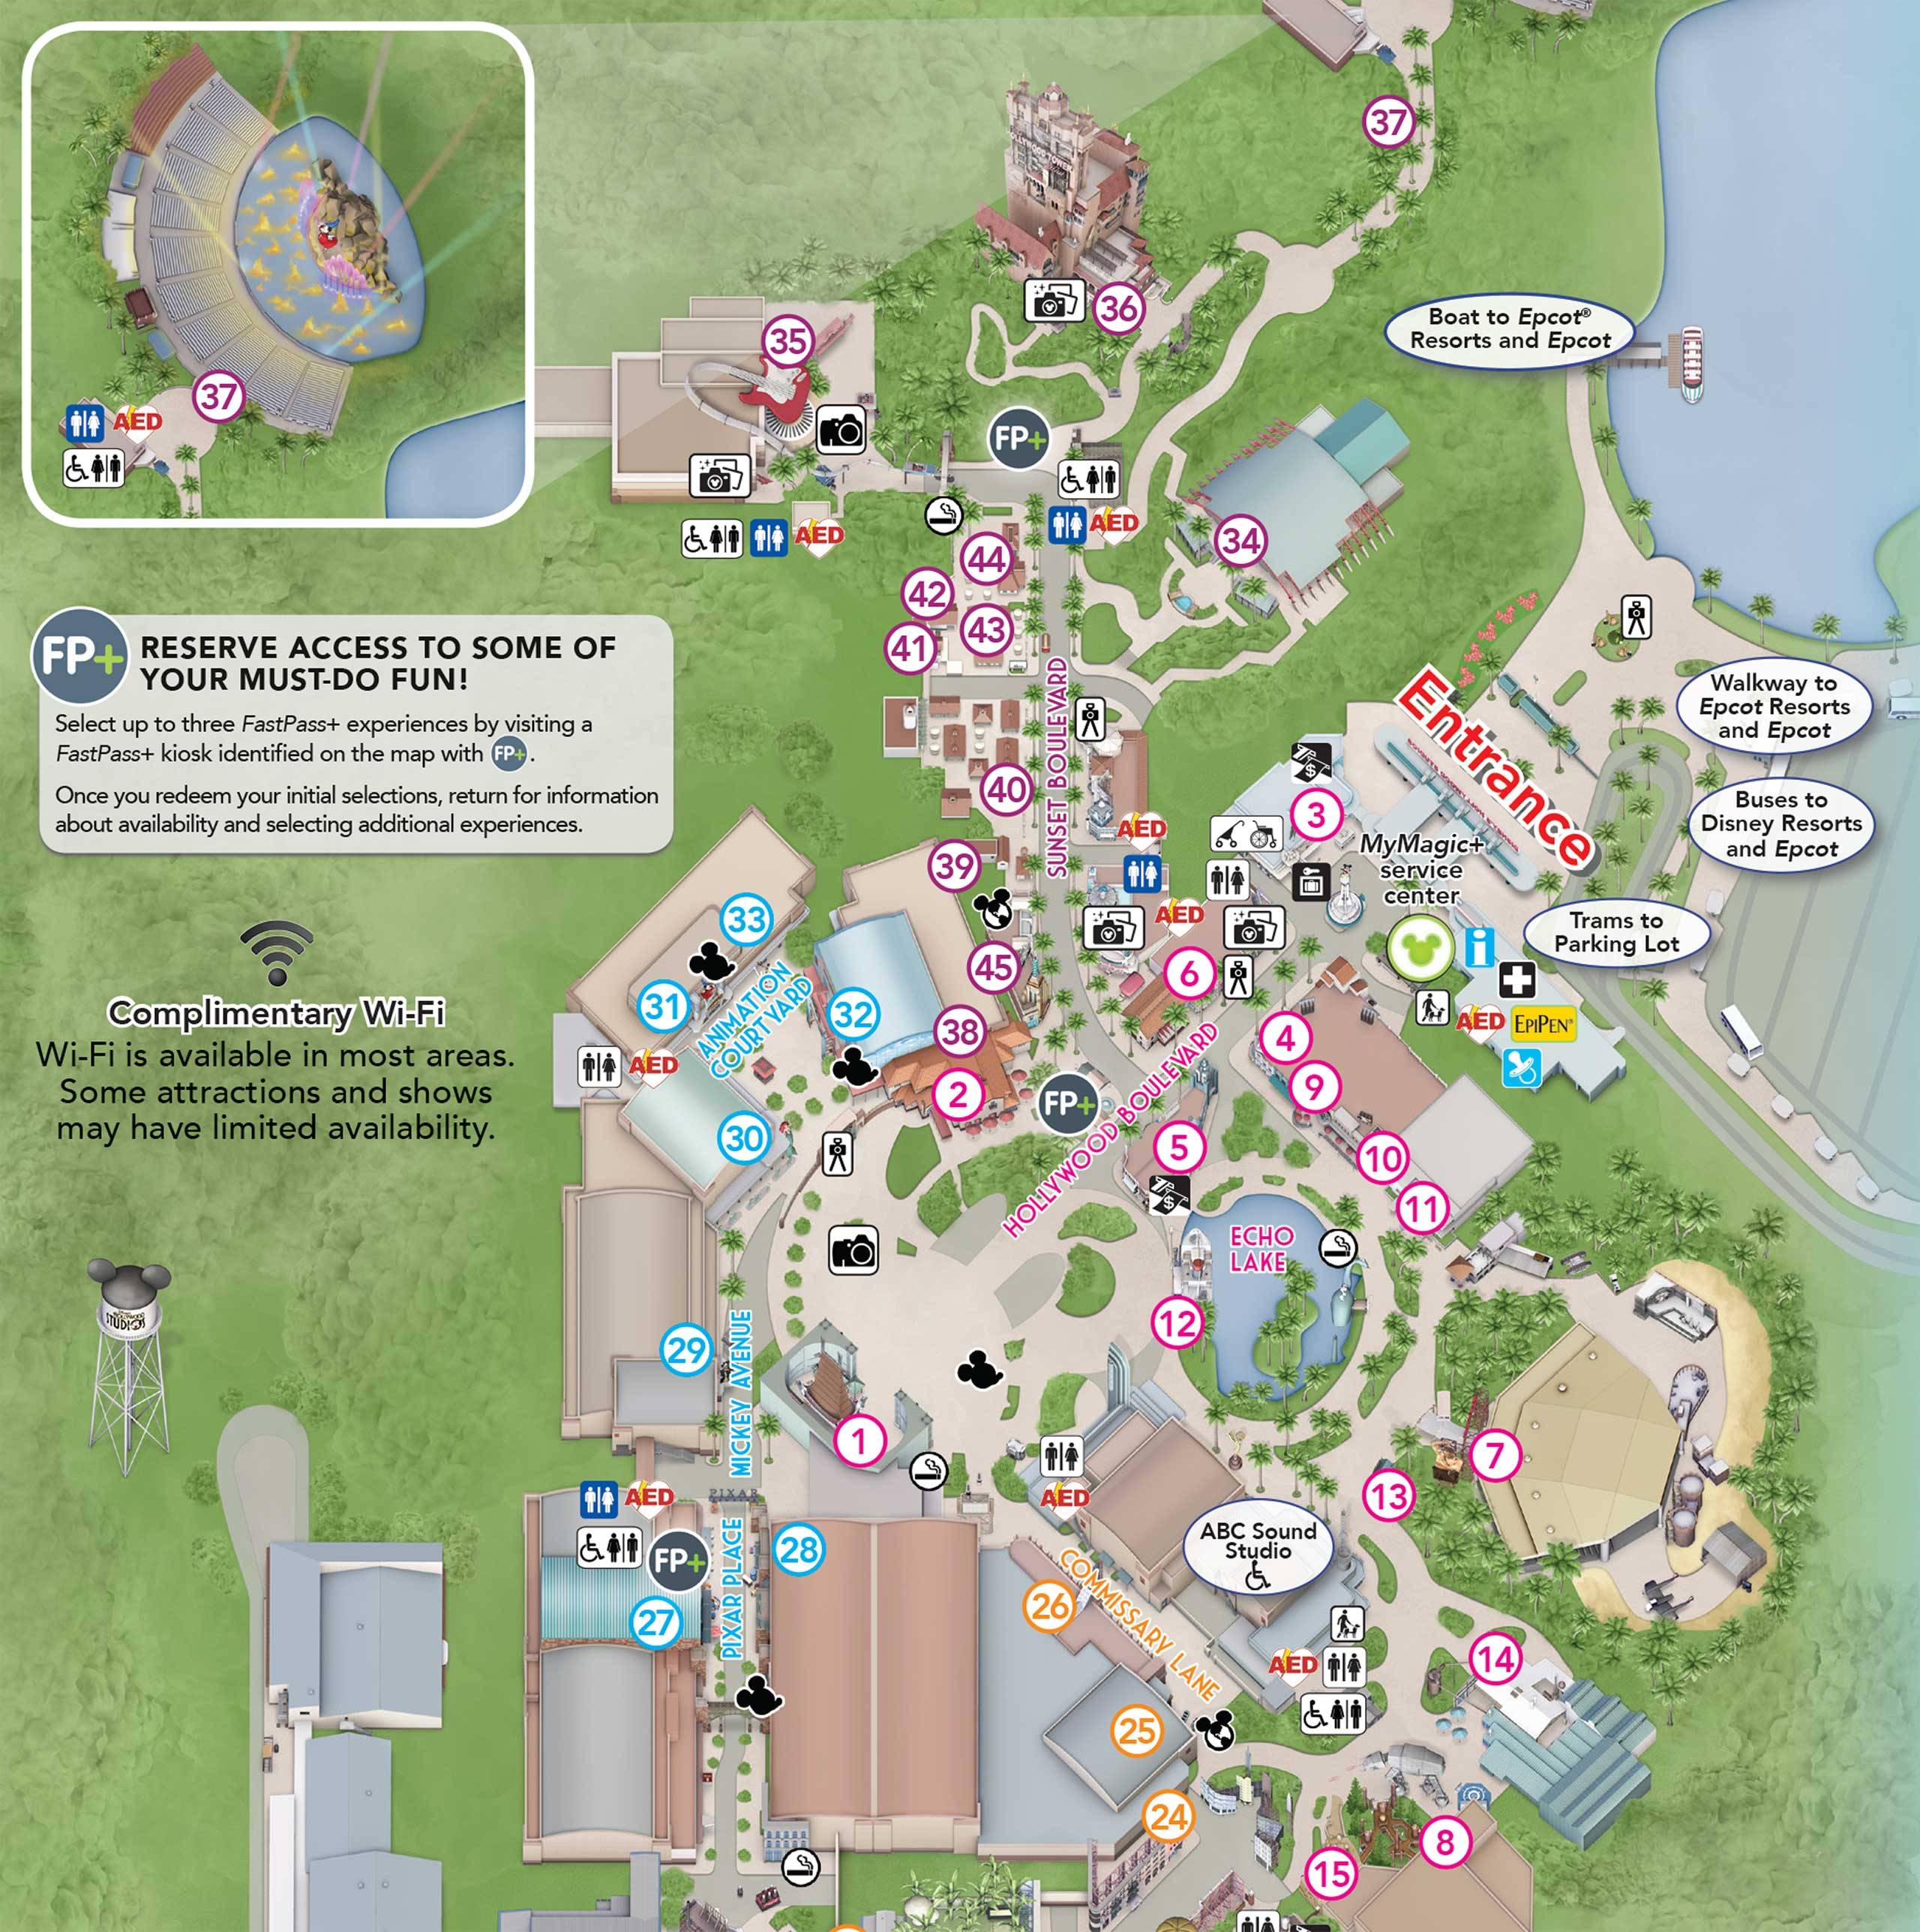 PHOTO - New Hollywood Studios guide map shows a hat-less Hollywood Blvd